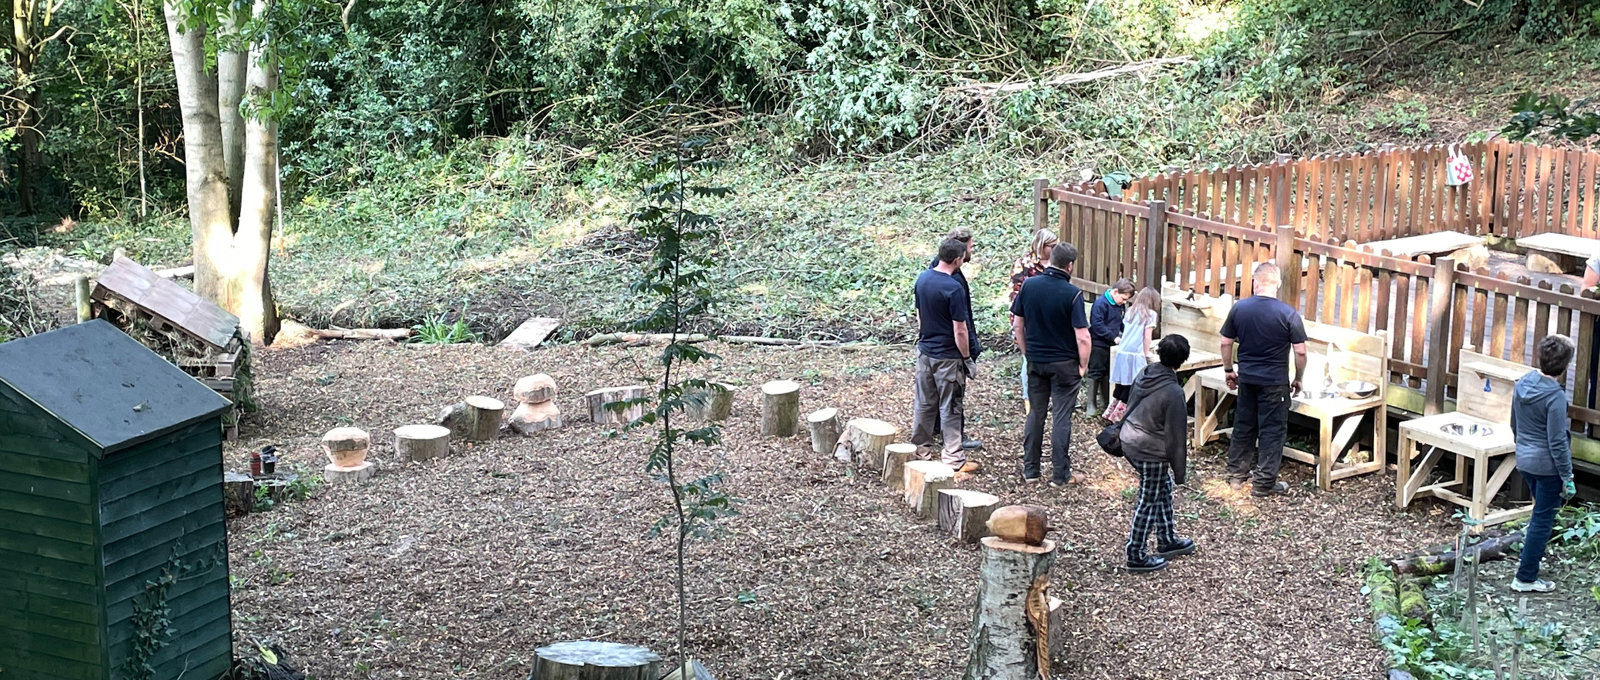 Photo of various team members from Futures working outdoors in a small woodland area at Lons infant School. There are various new wooden constructions in the photo.